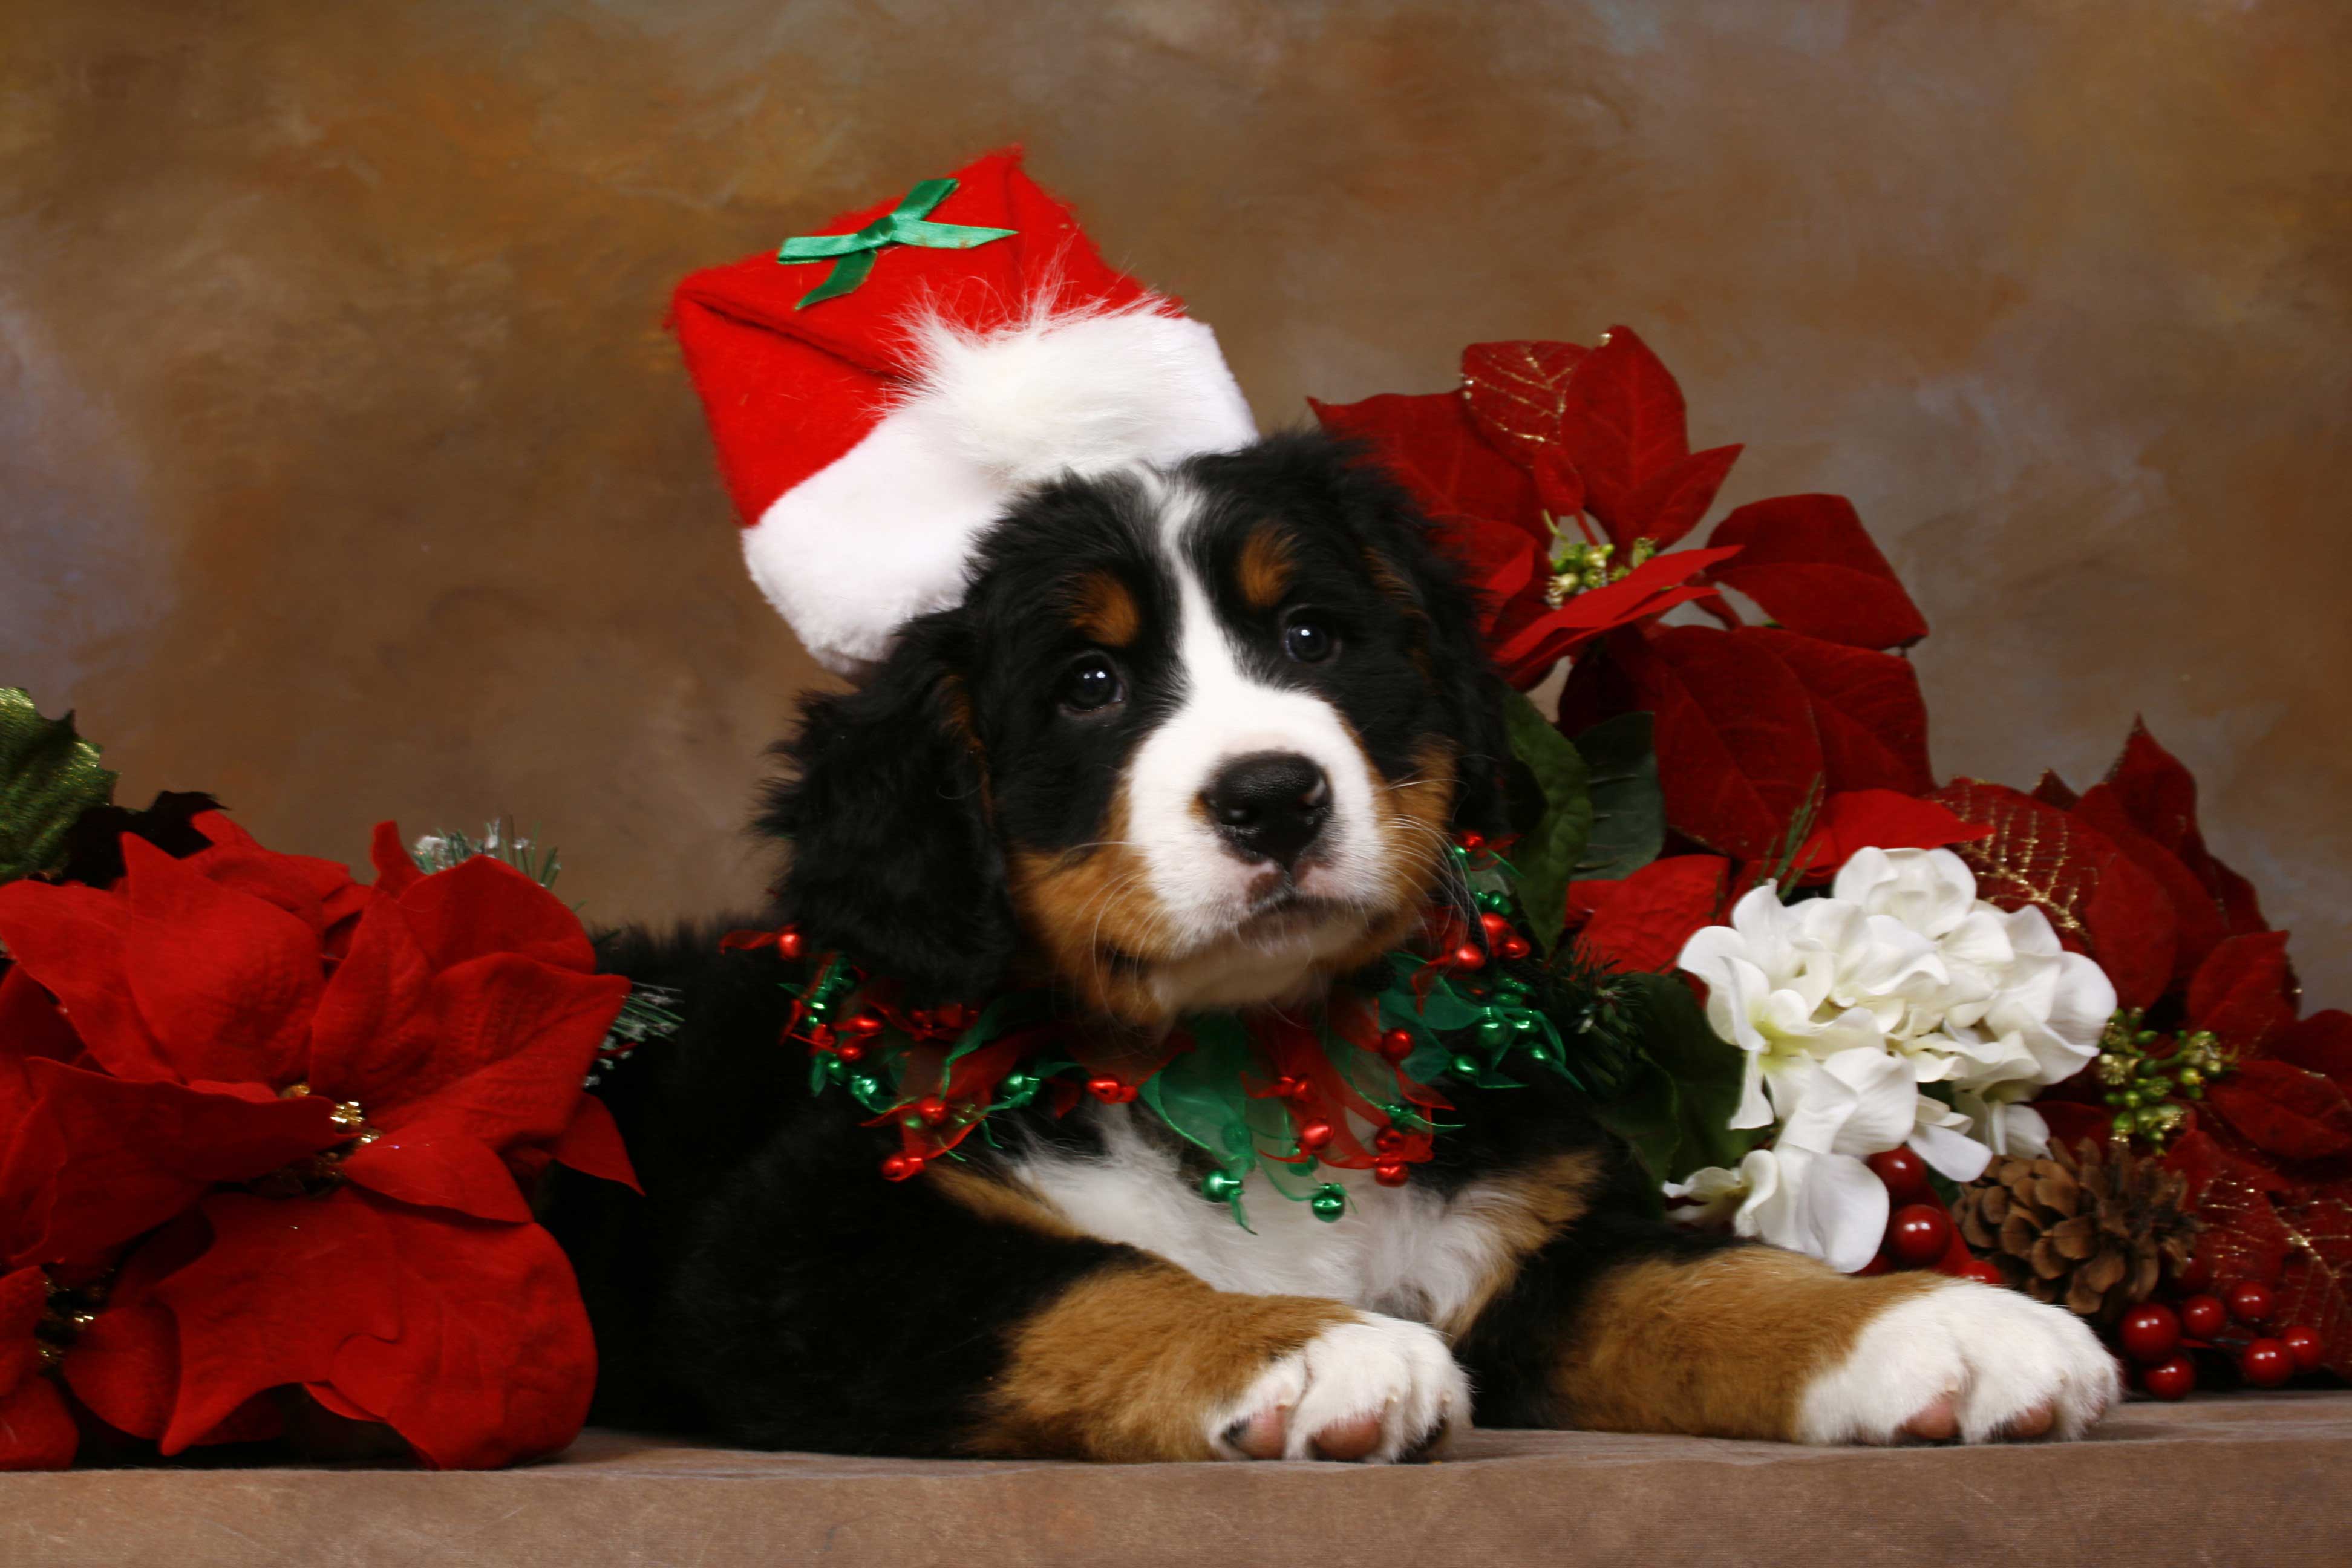 Christmas Puppy Images Wallpaper - Christmas Puppy - HD Wallpaper 